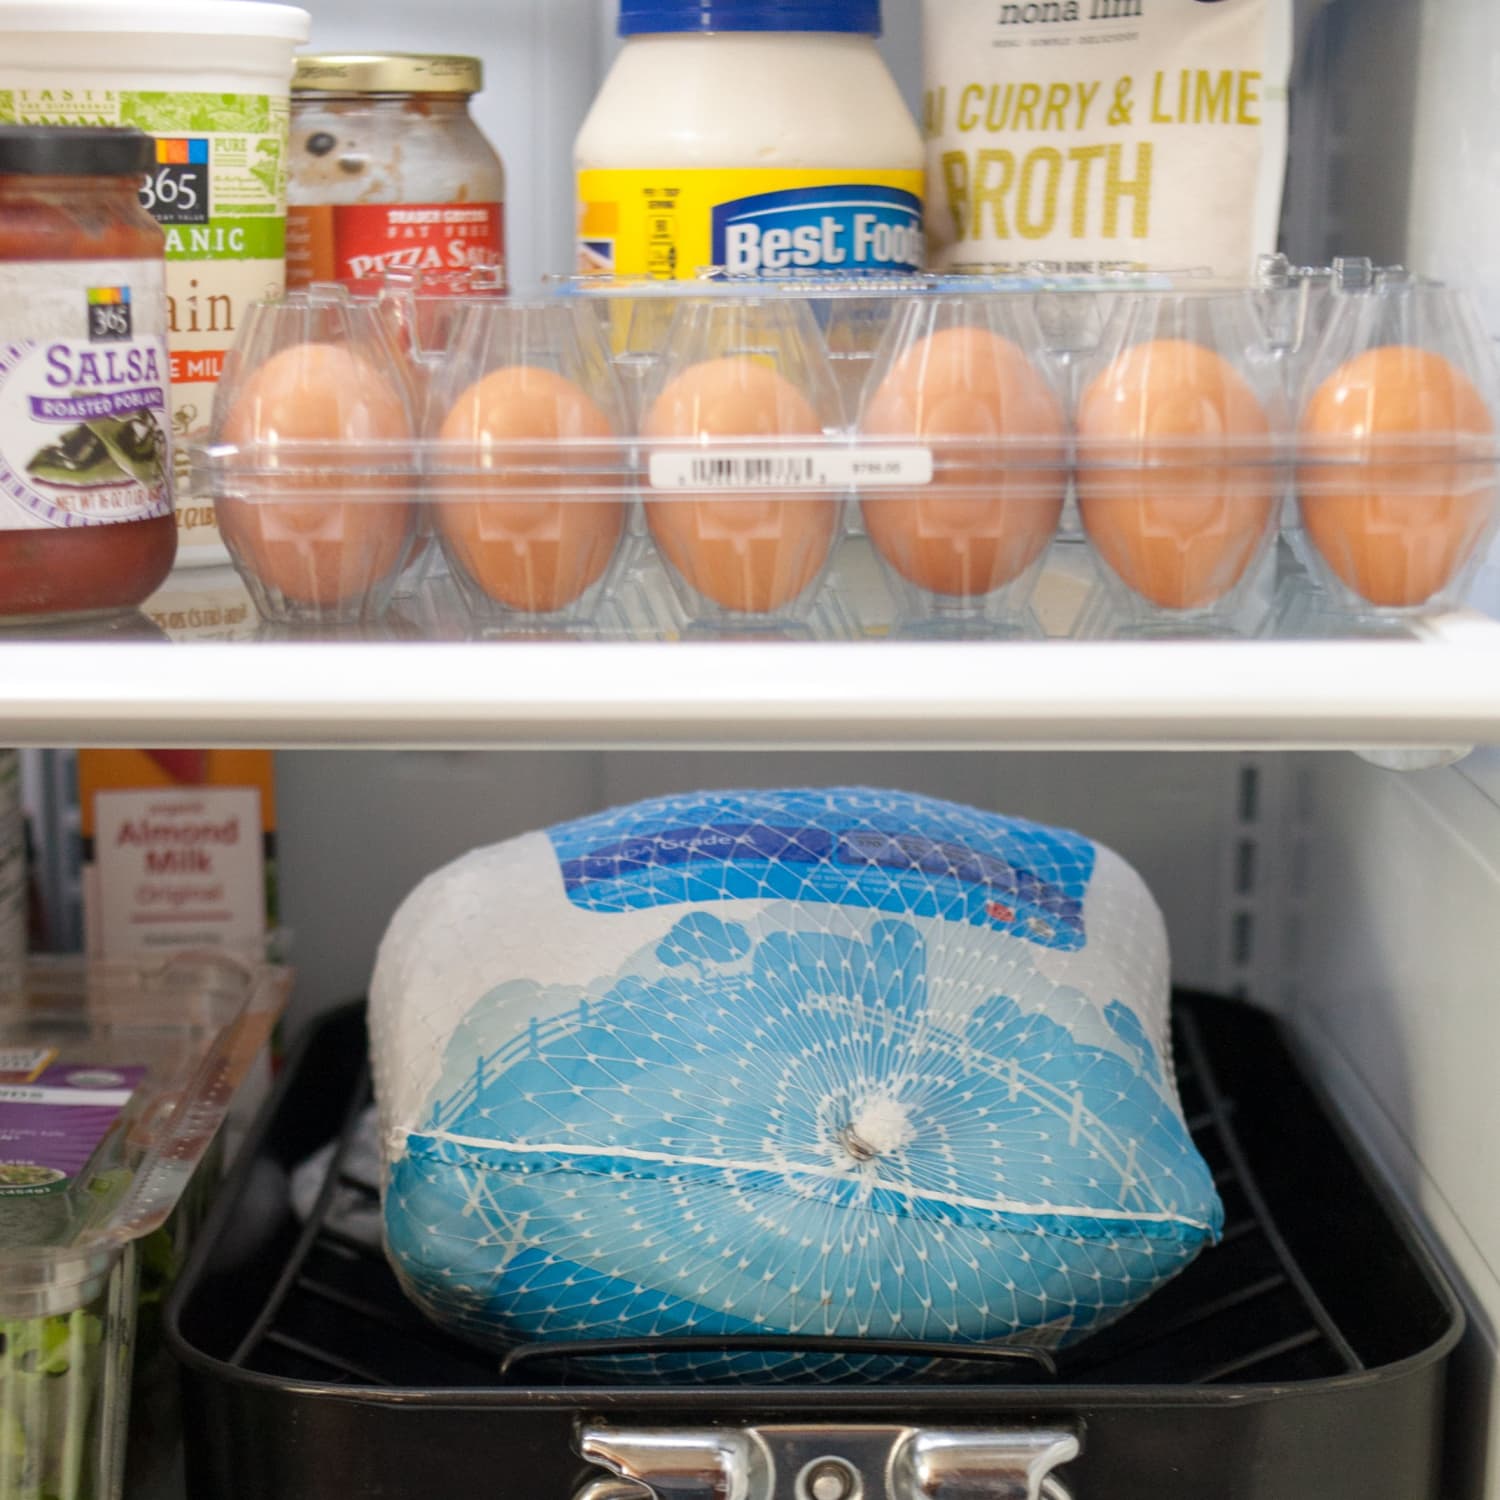 How To Thaw A Turkey How Long To Defrost A Turkey Kitchn,Chicken Breast Calories 100 Grams